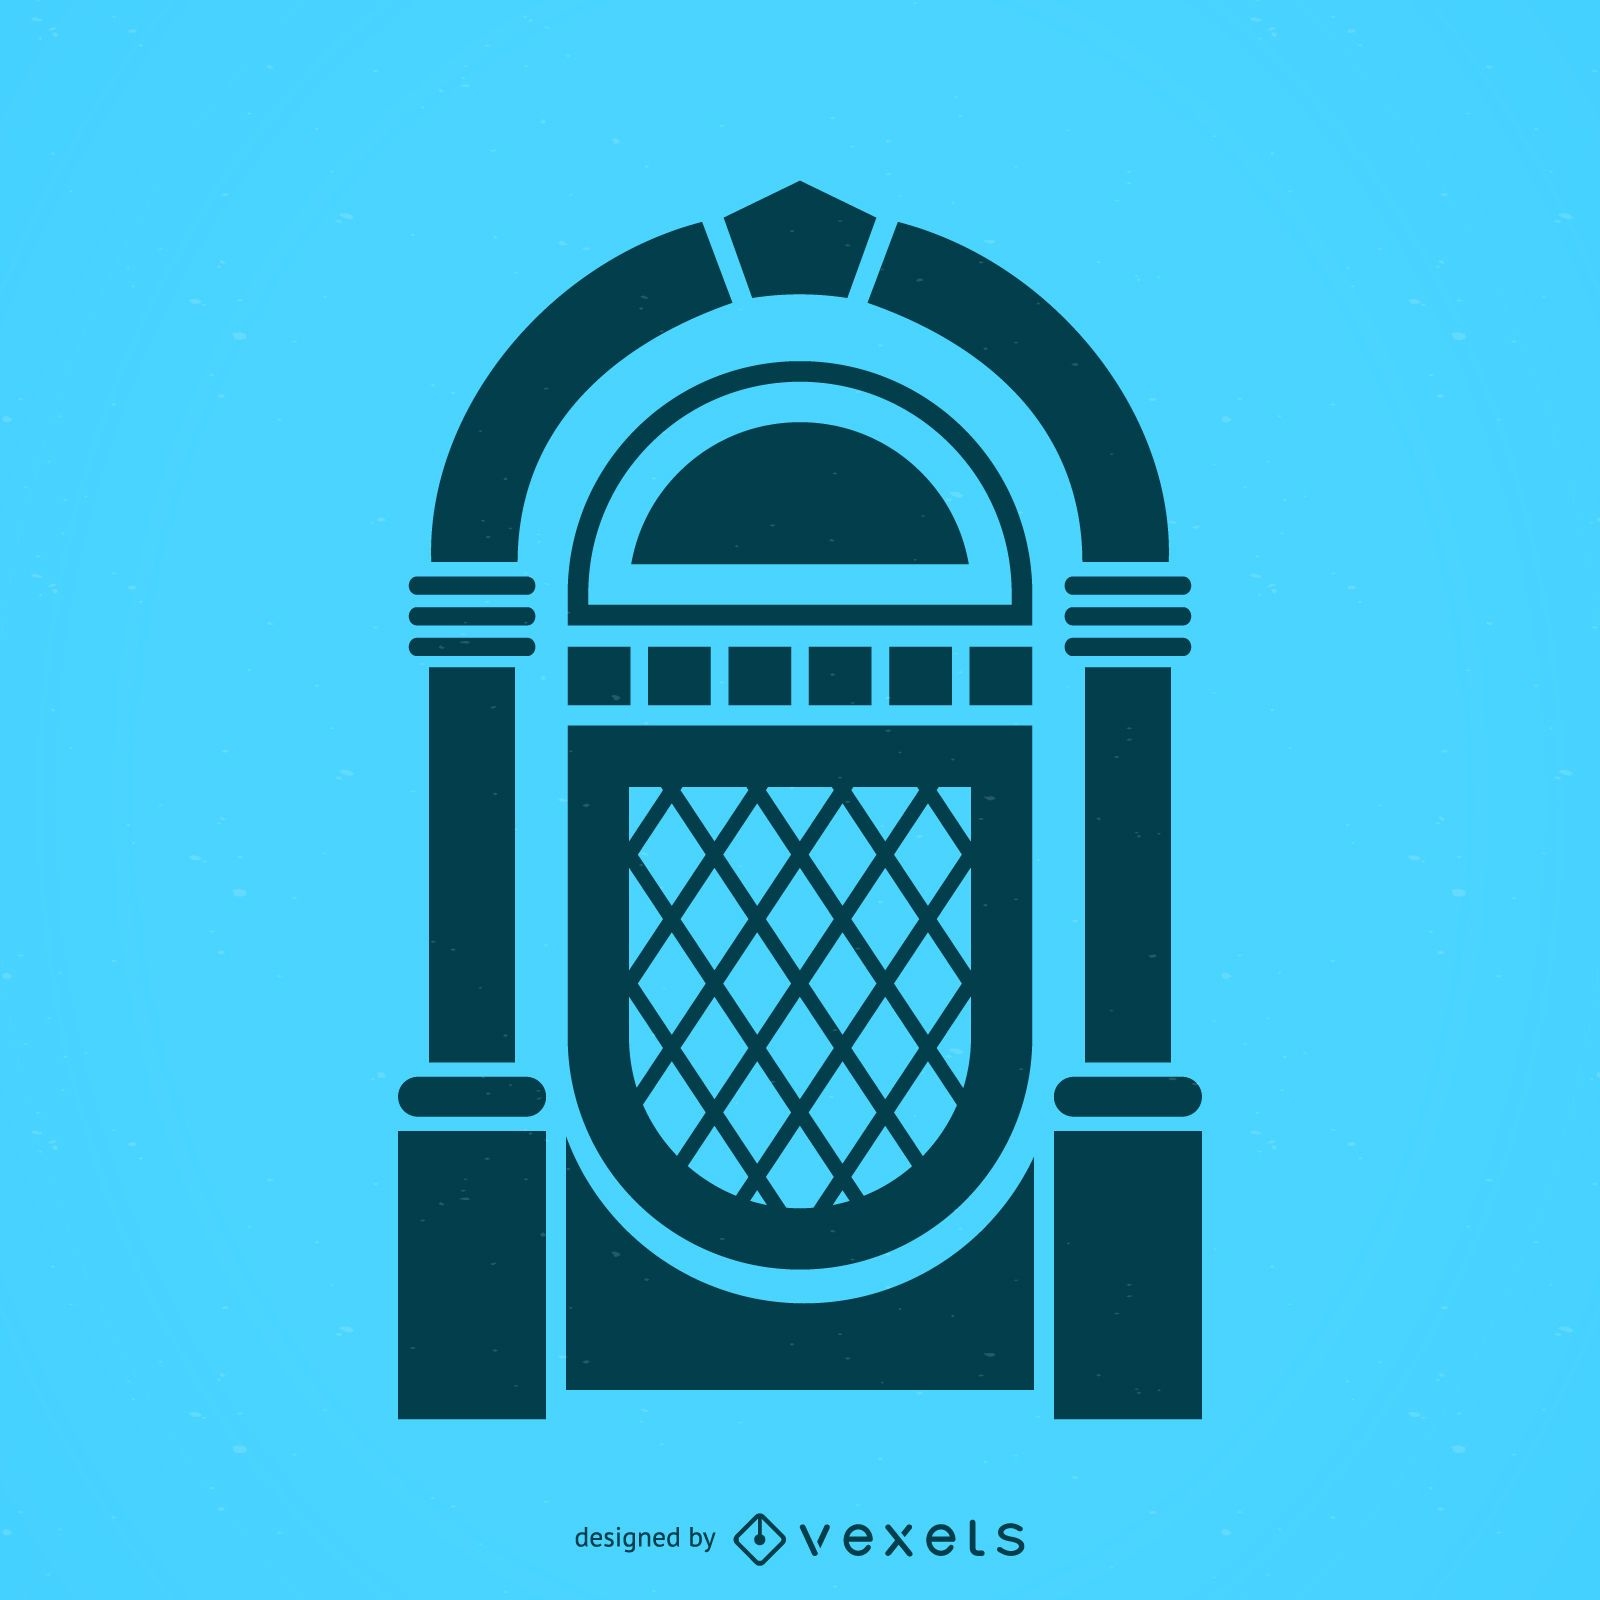 Musical jukebox silhouette icon